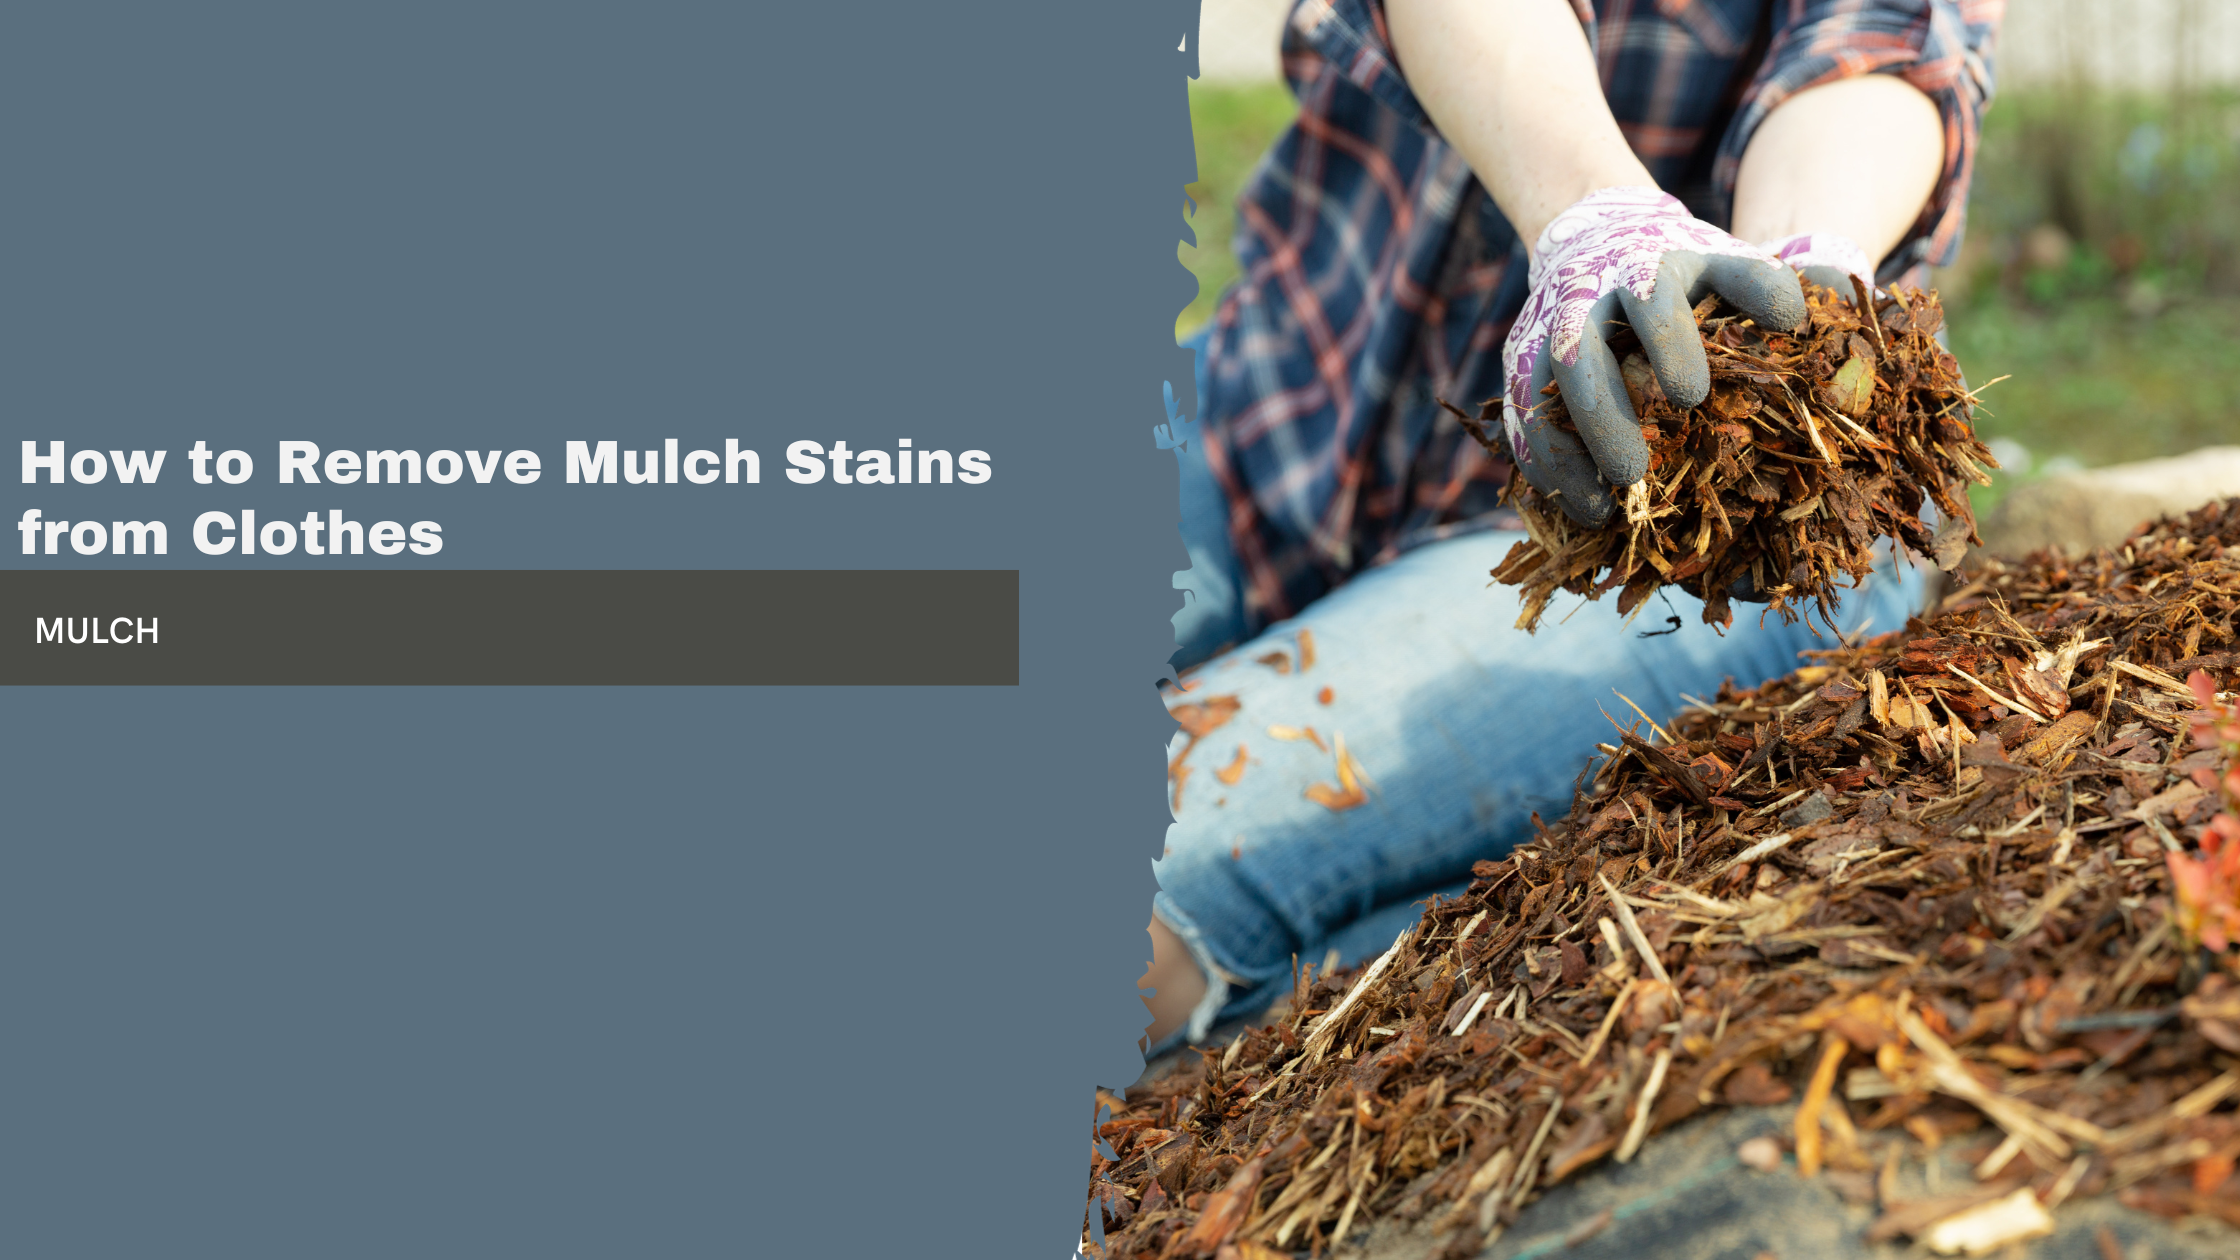 How to Remove Mulch Stains from Clothes